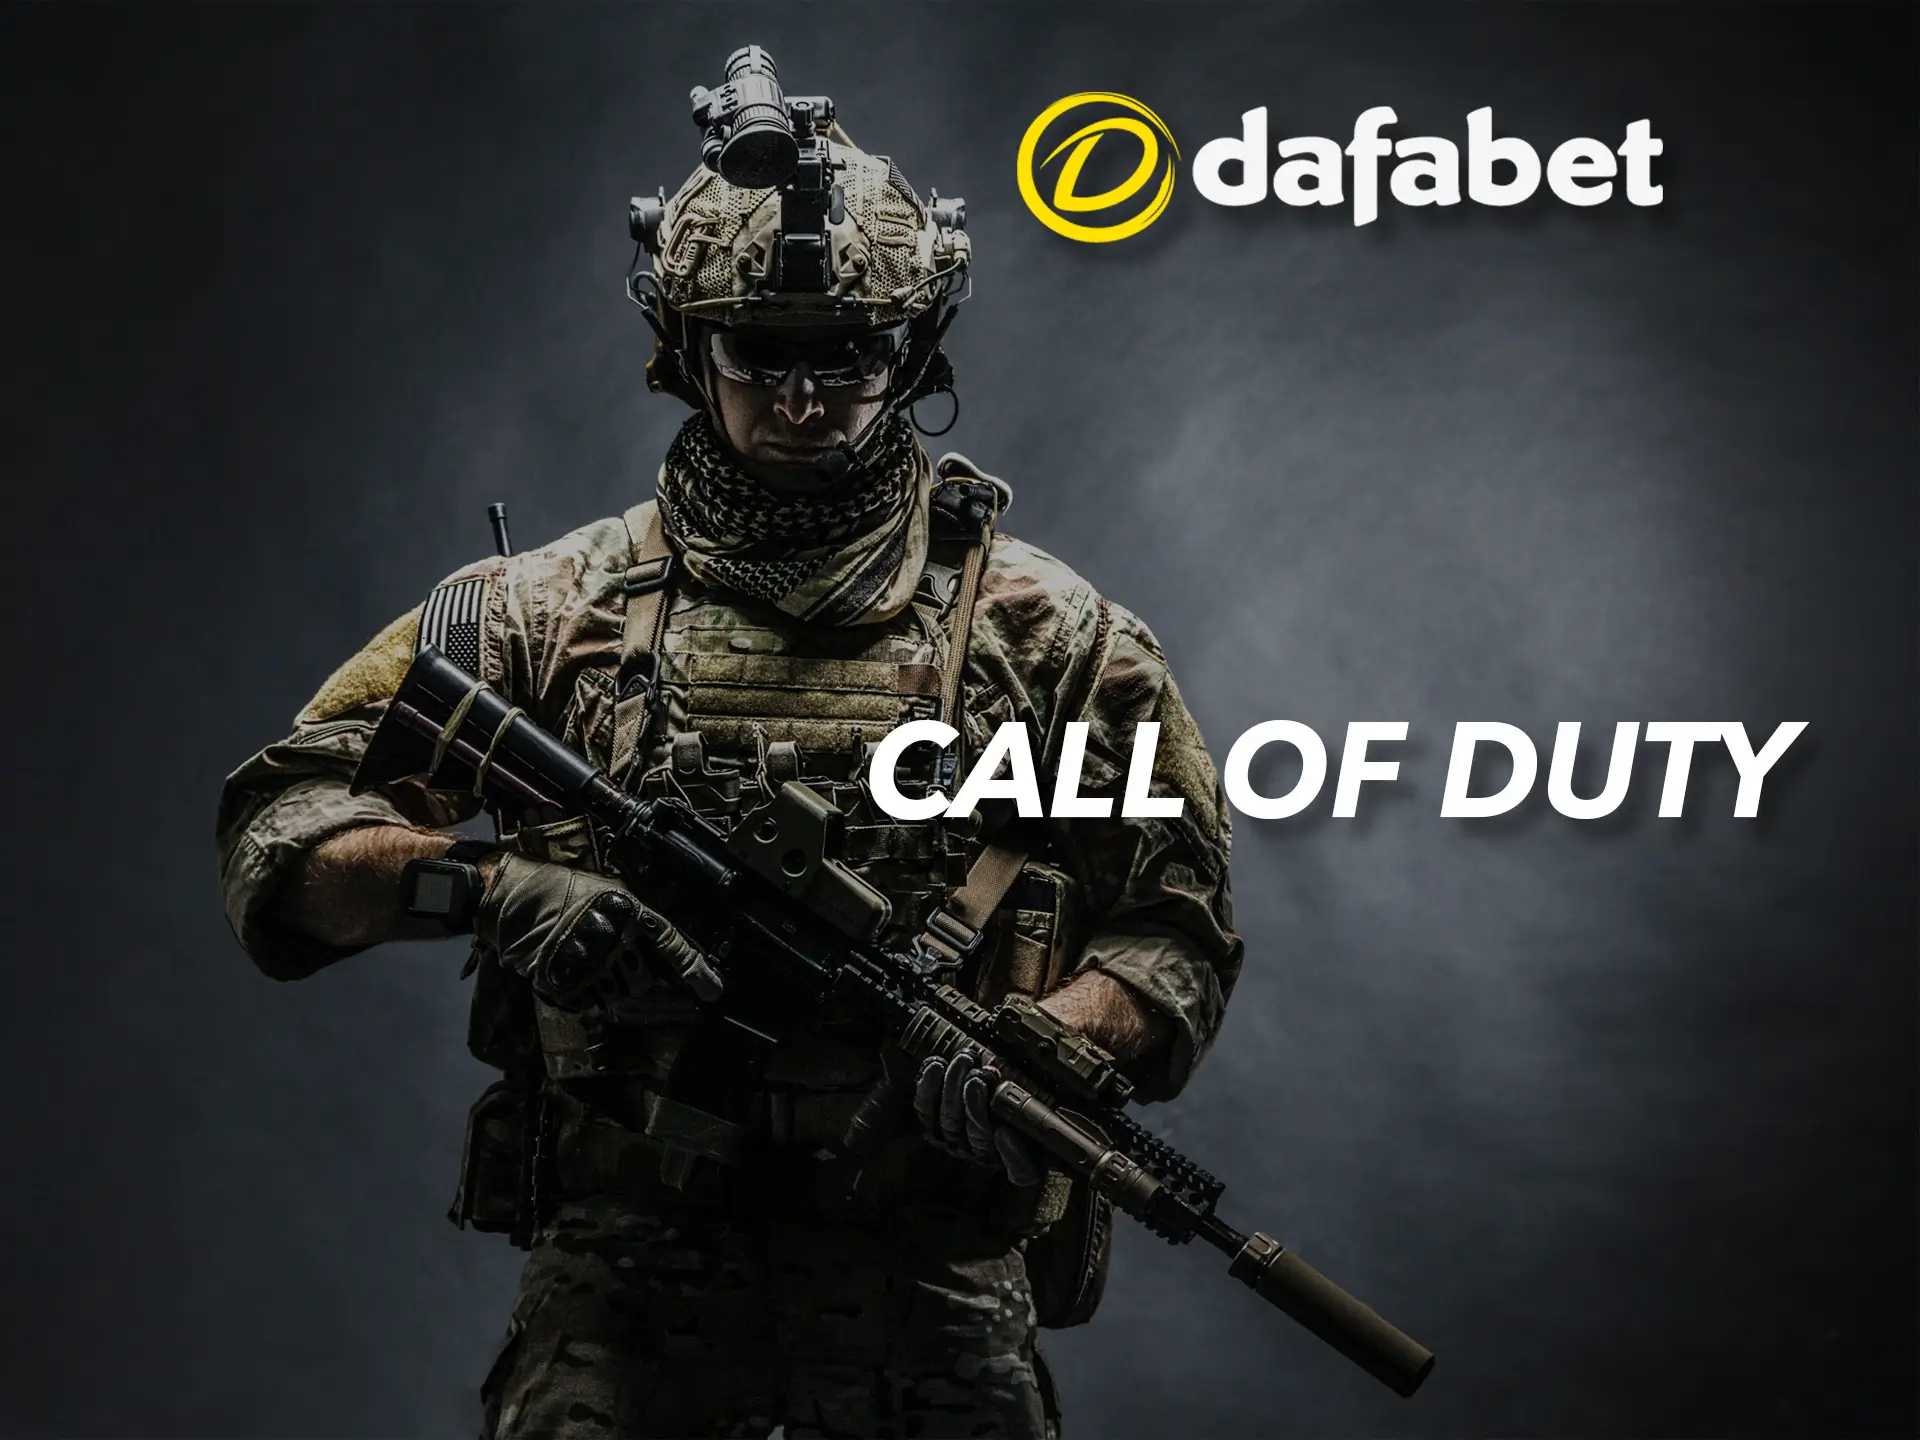 Make your predictions on experienced cyber sports athletes at Dafabet.